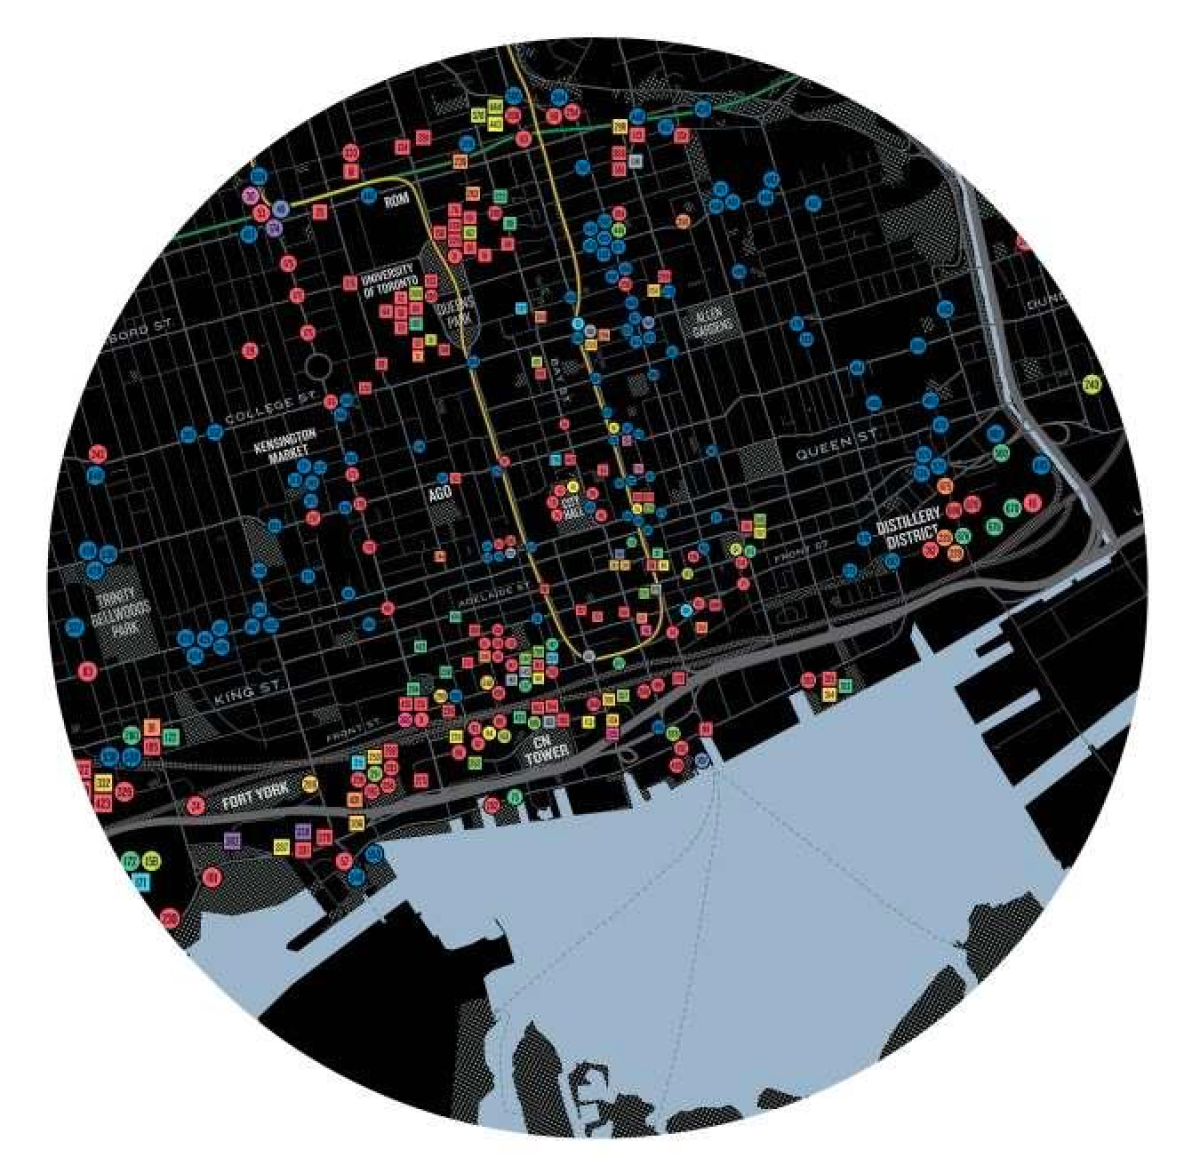 a map of toronto's downtown area